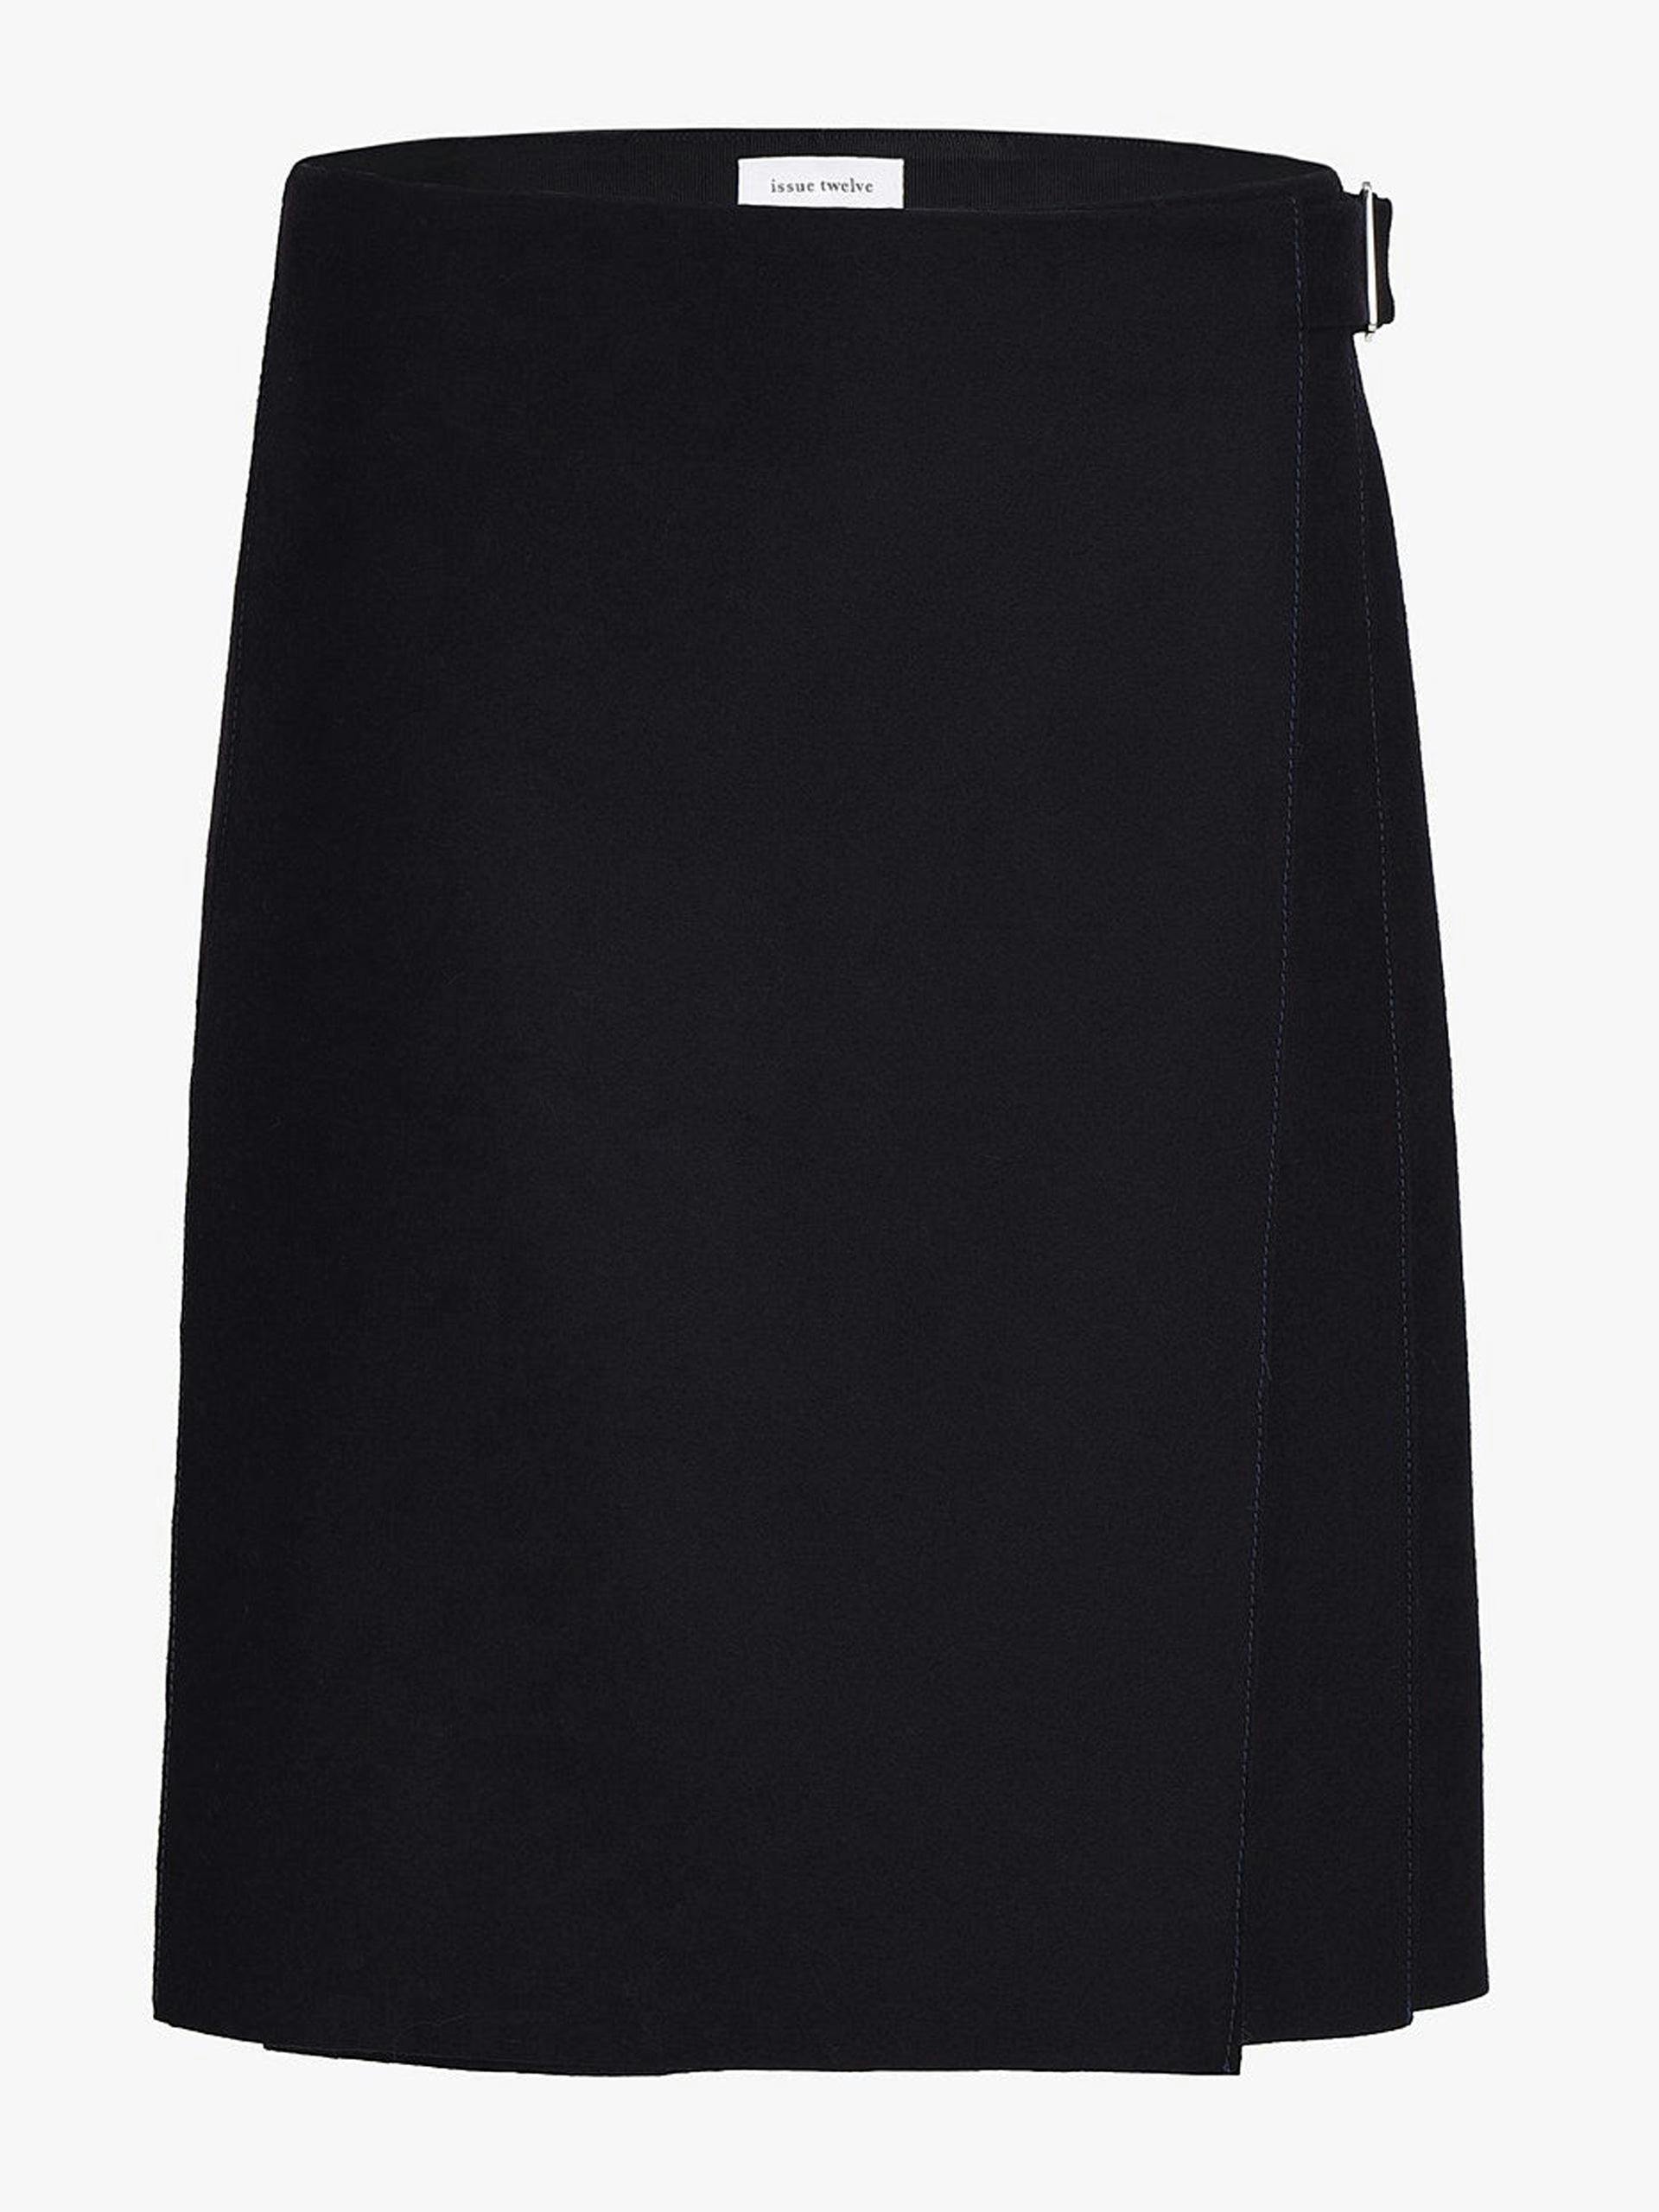 Kate navy blue wool and cashmere skirt